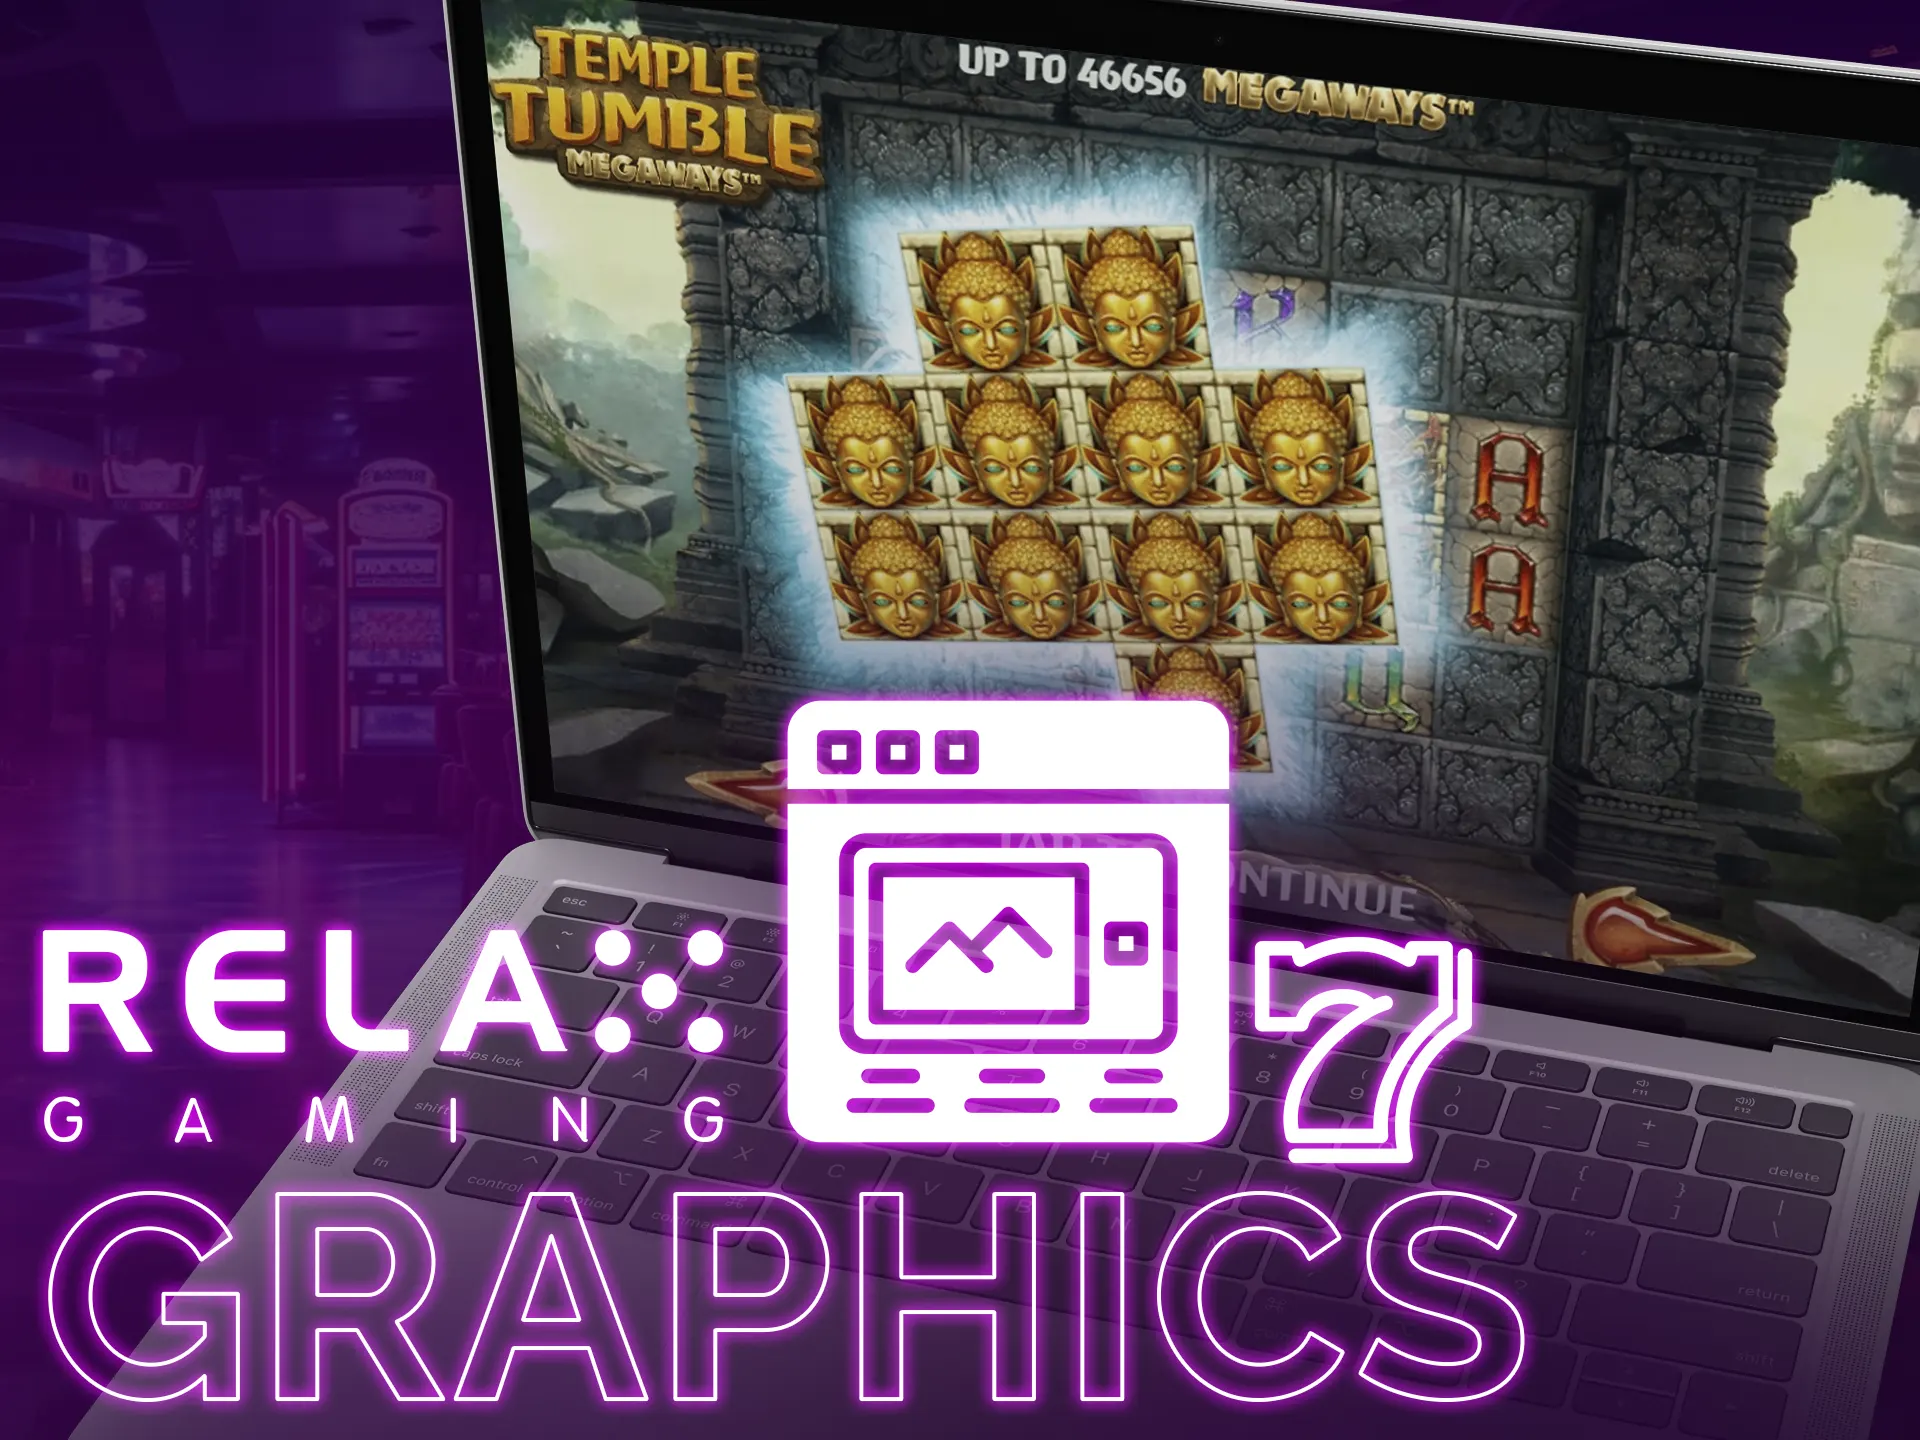 Relax Gaming offers top-quality graphics in slots.